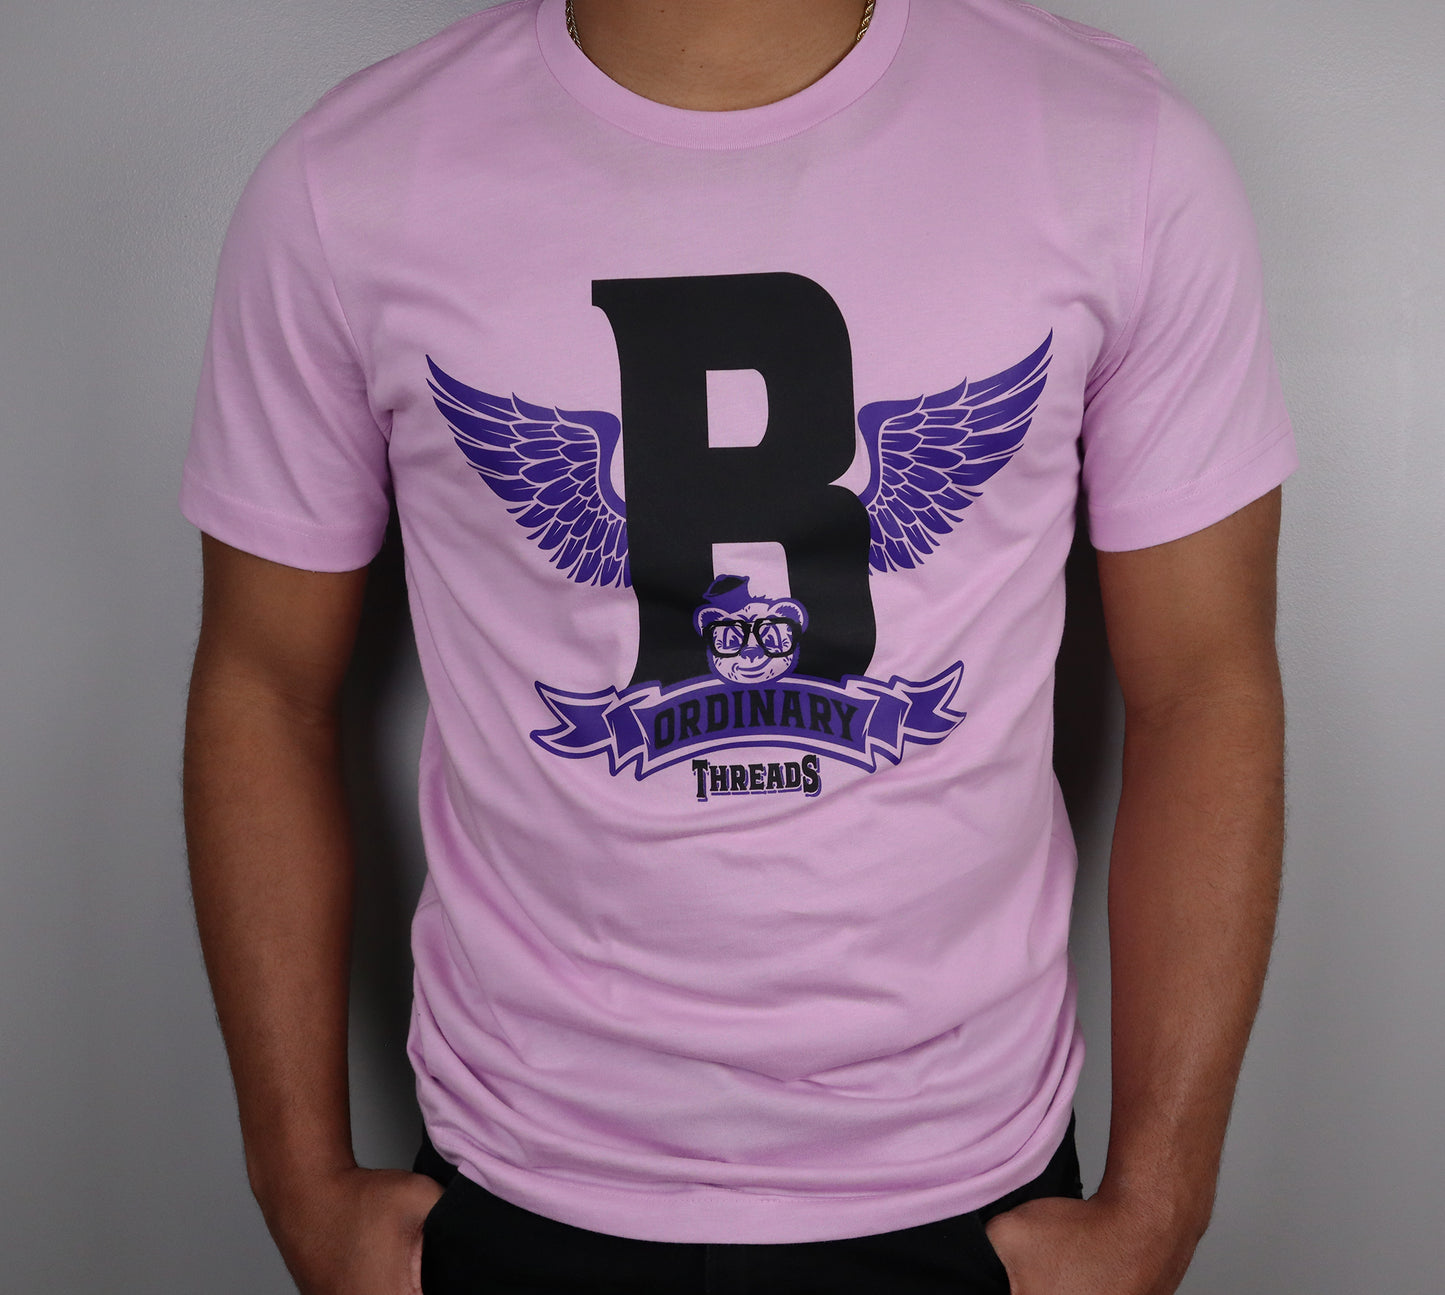 Barely "Winged B" Tee (Blk/Prpl)